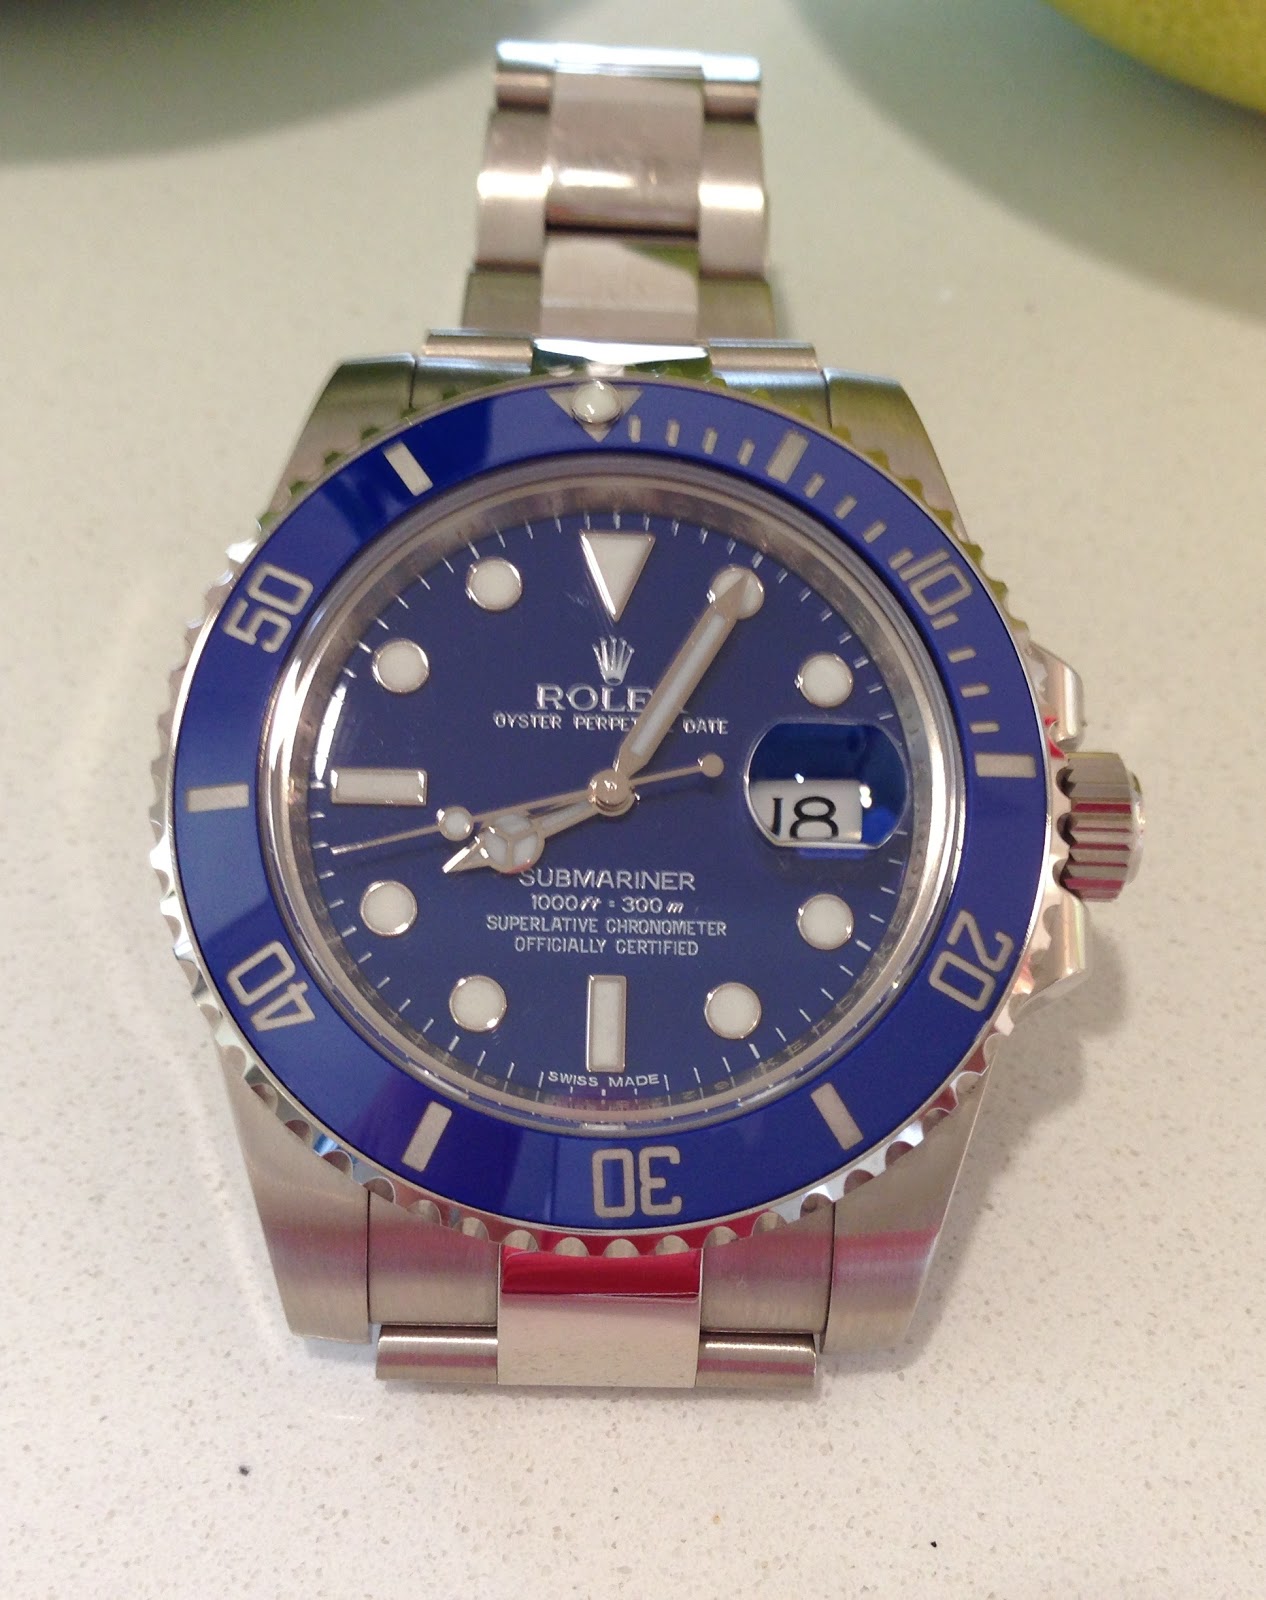 Rolex Submariner White Gold Ref 116619LB...One of my two Rolex Dream ...